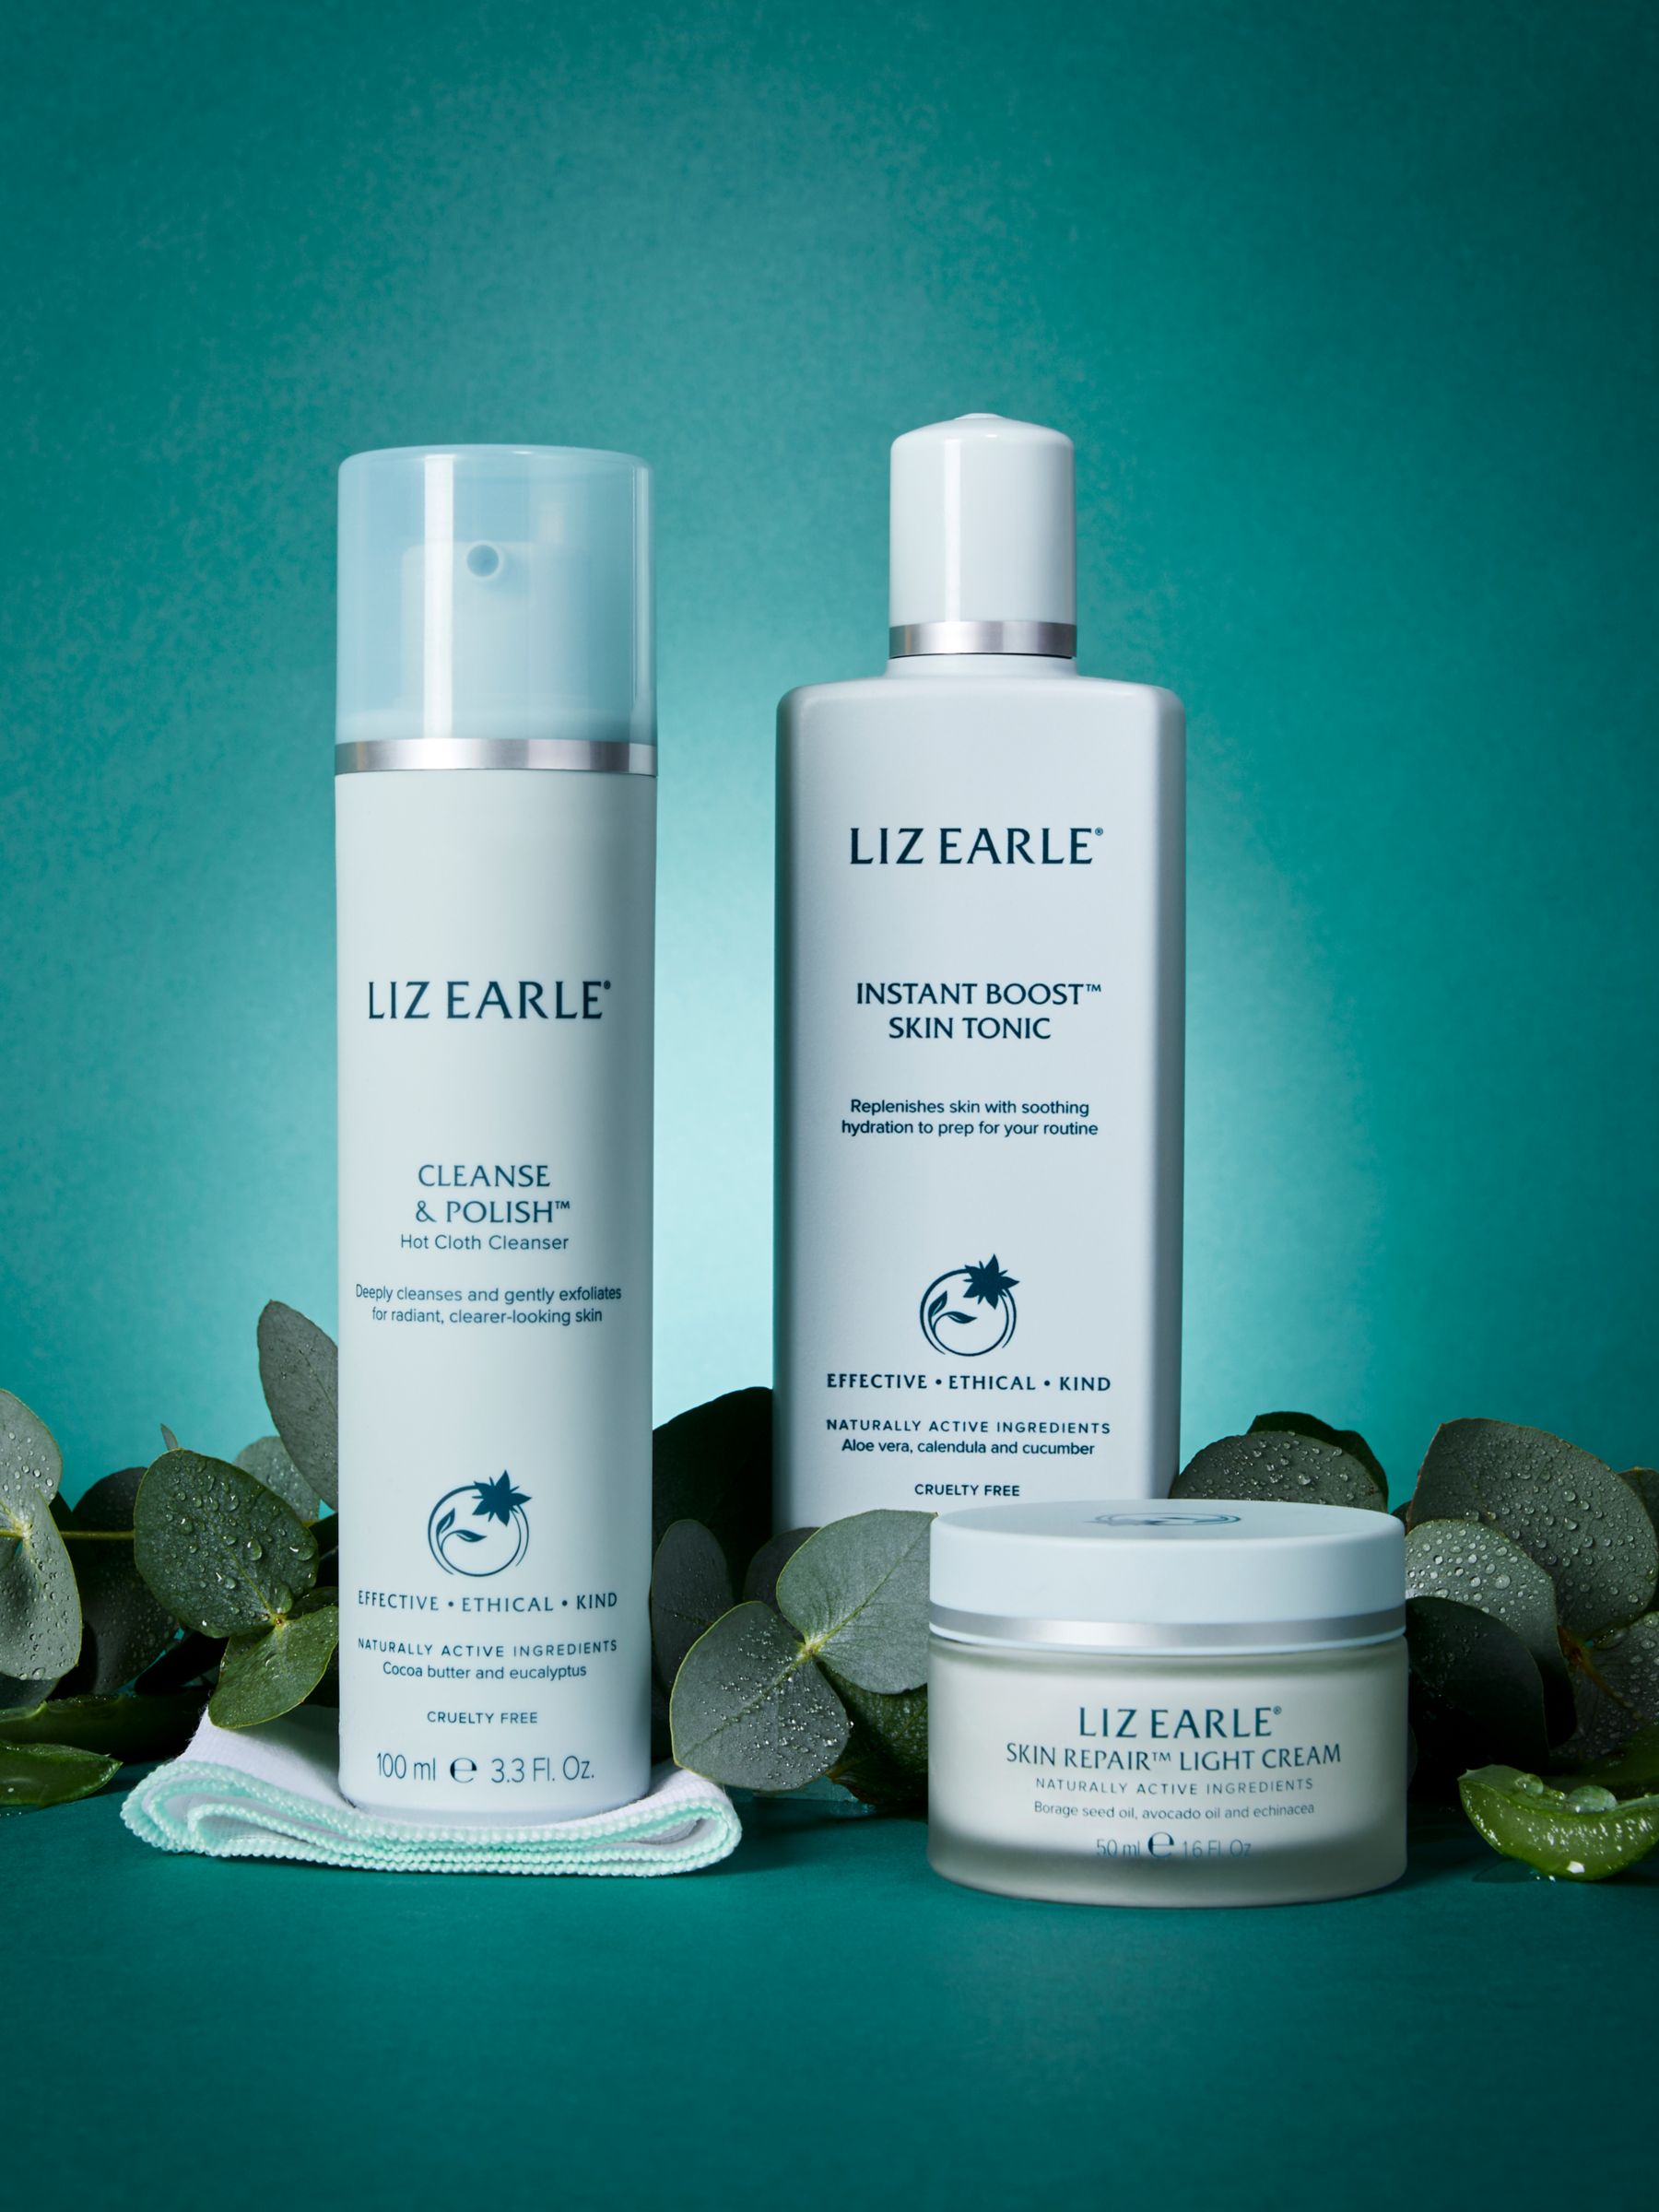 Liz Earle Hydration Boosting Routine Skincare Gift Set 4